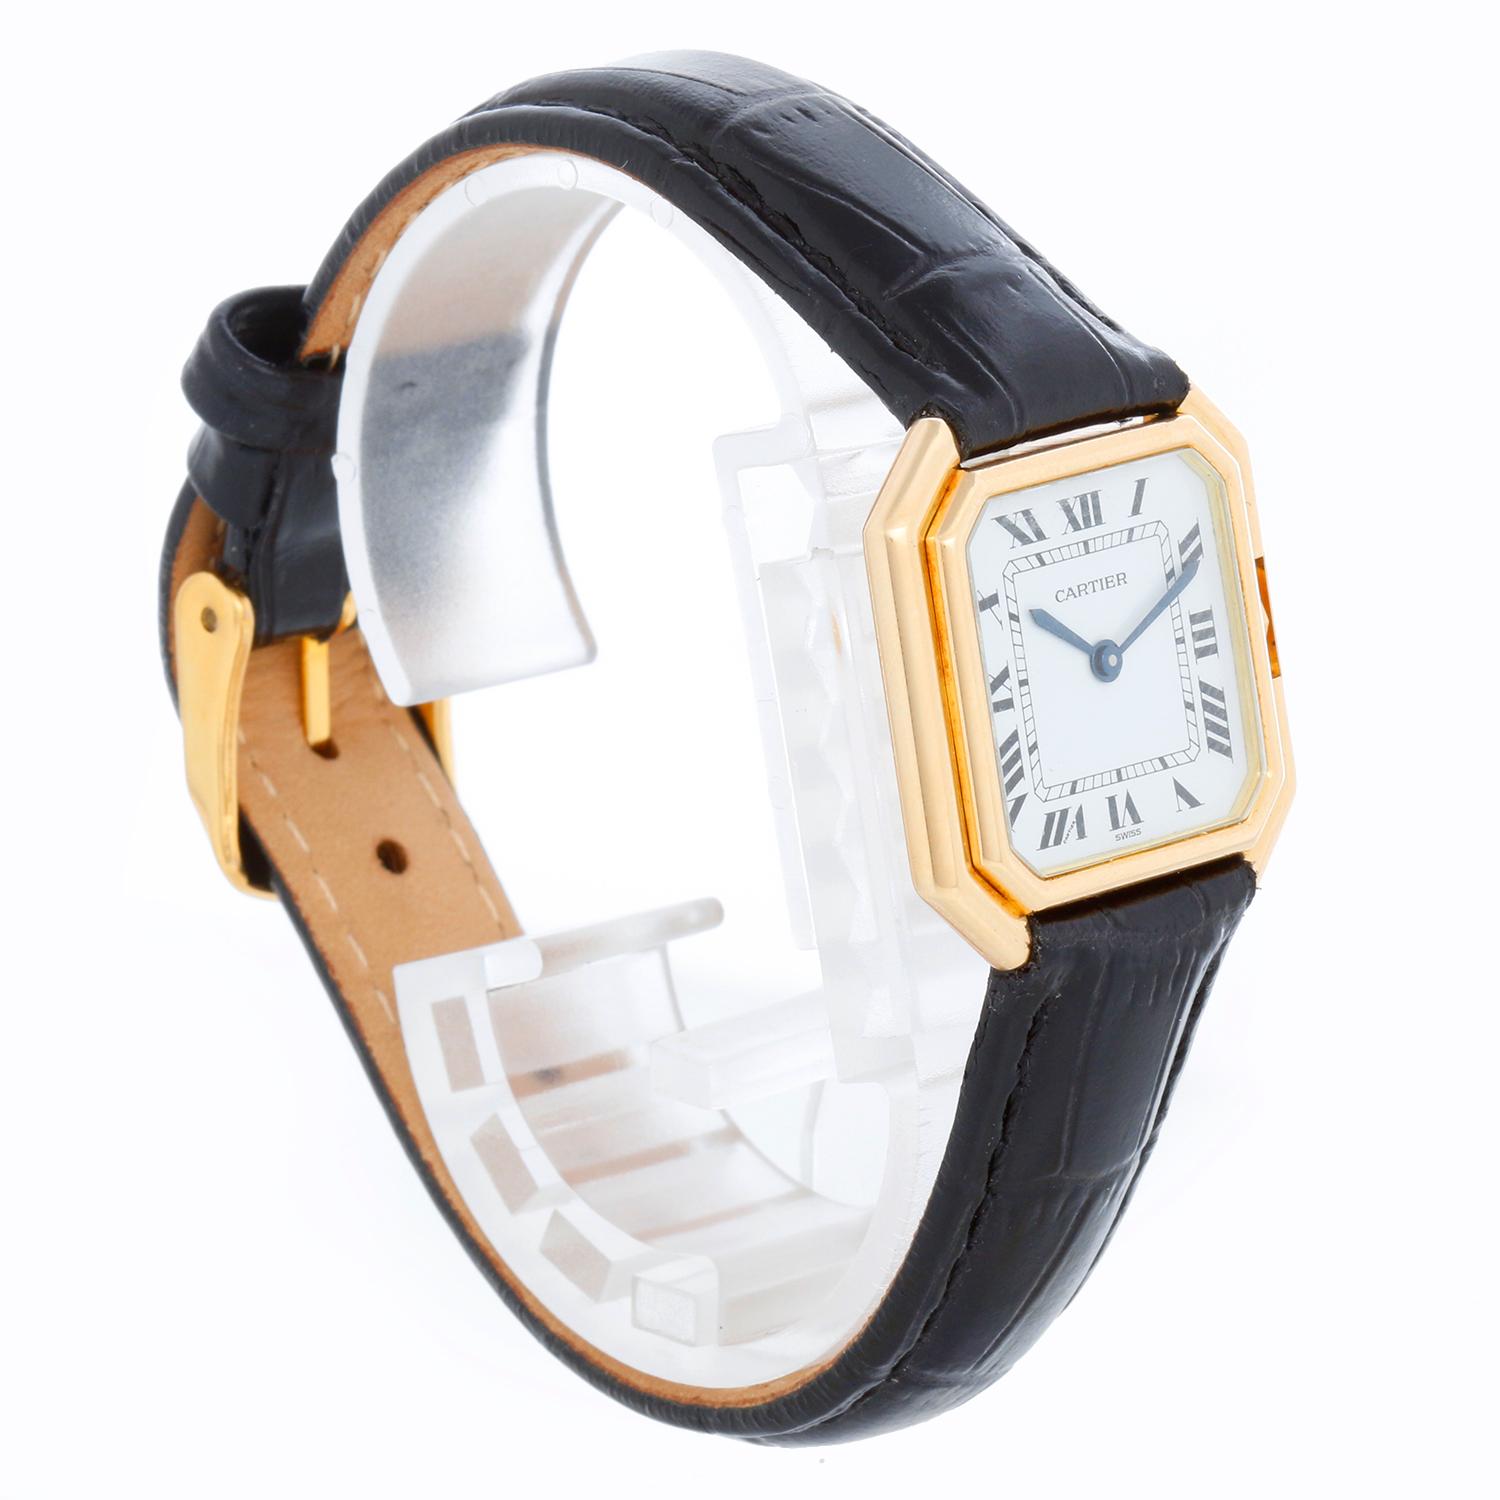 Cartier Ceinture 18K Yellow Gold  Ladies Watch - Manual winding. 18K Yellow Gold Octagonal  ( 24 mm x 26 mm ). White dial with Roman numerals. Black crocodile strap with tang buckle. Pre-owned with custom box.